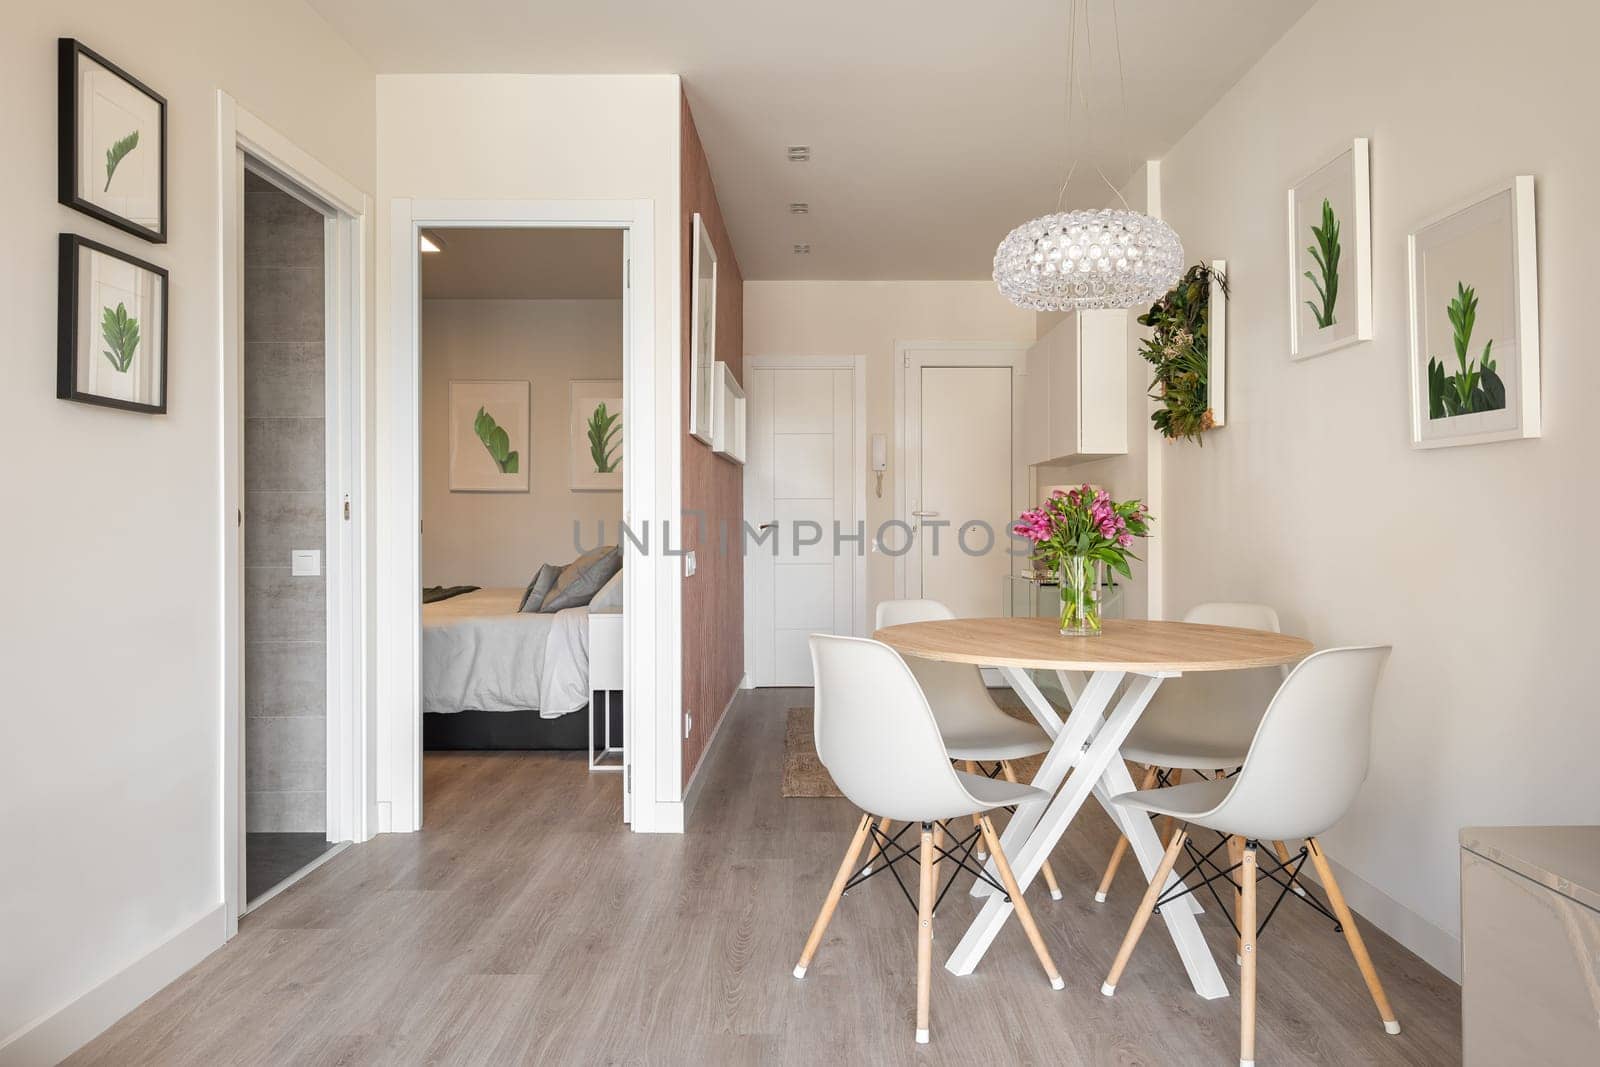 Stylish dining area in studio living room with table and chairs and decorative accessories overlooking the outdoor bathroom and bedroom. Concept of interior for a small apartmen by apavlin